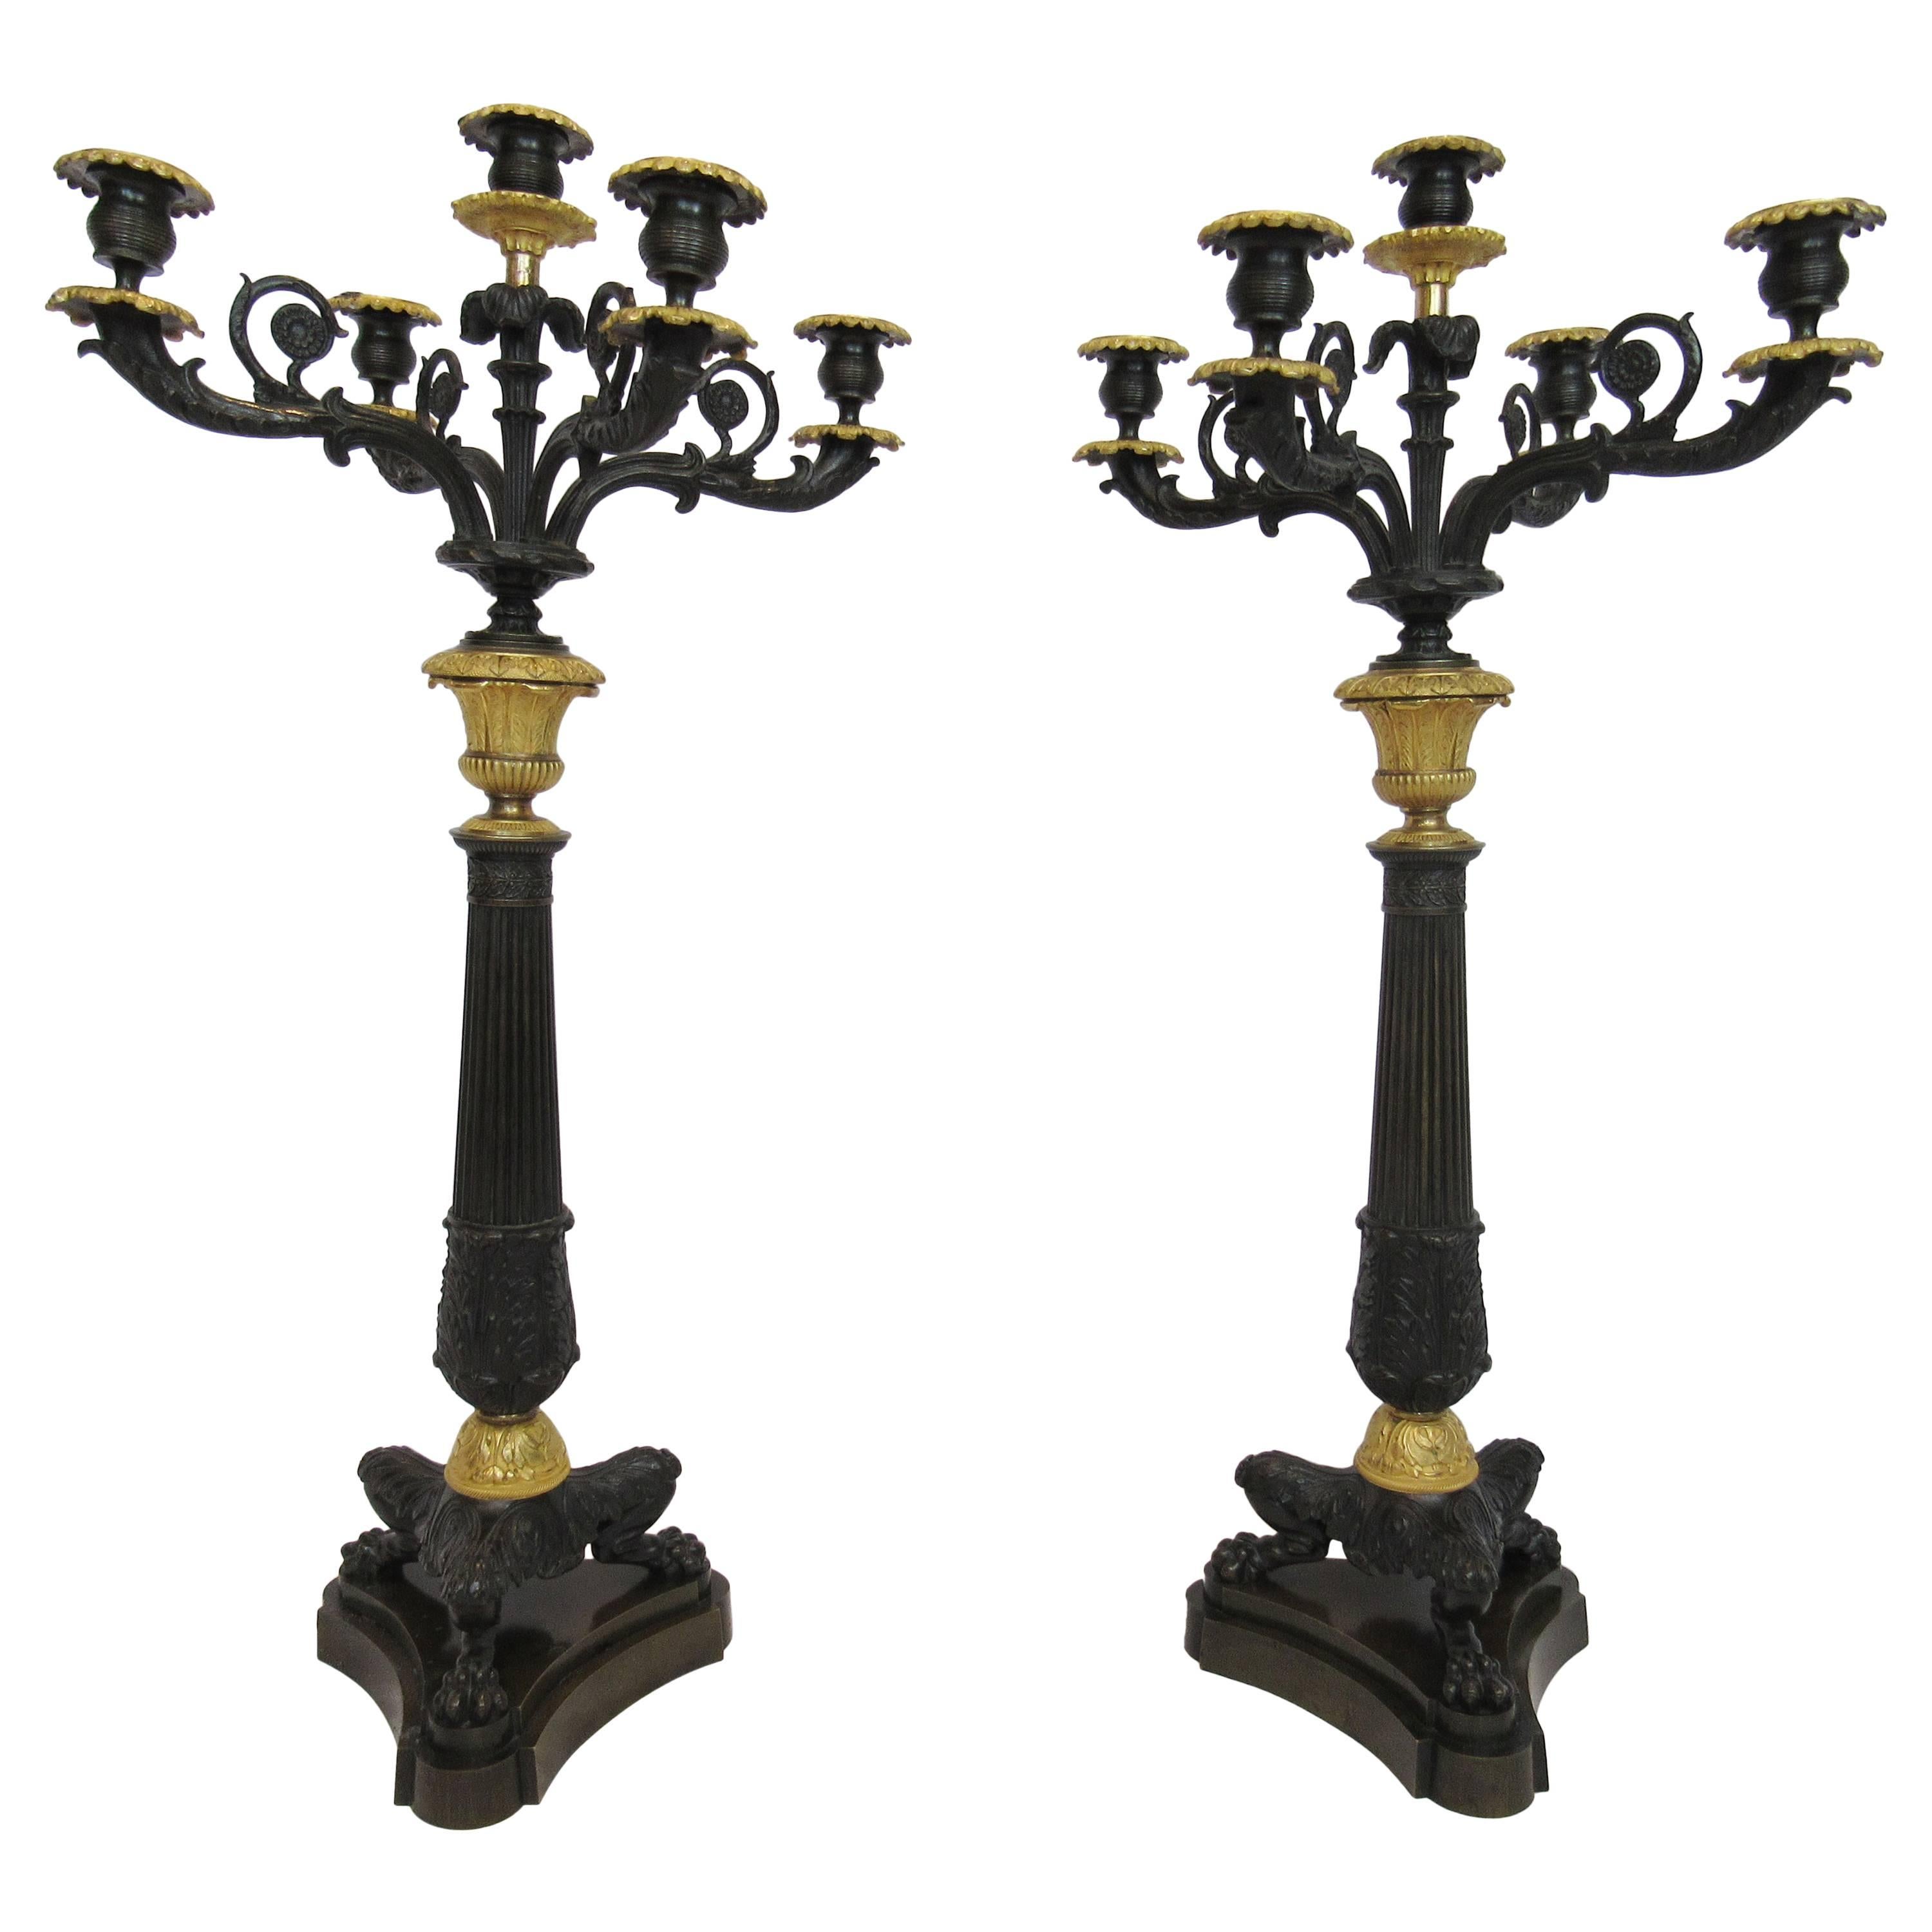 Large Pair of French Empire-Style Candelabra Bronze and Ormolu, 19th Century